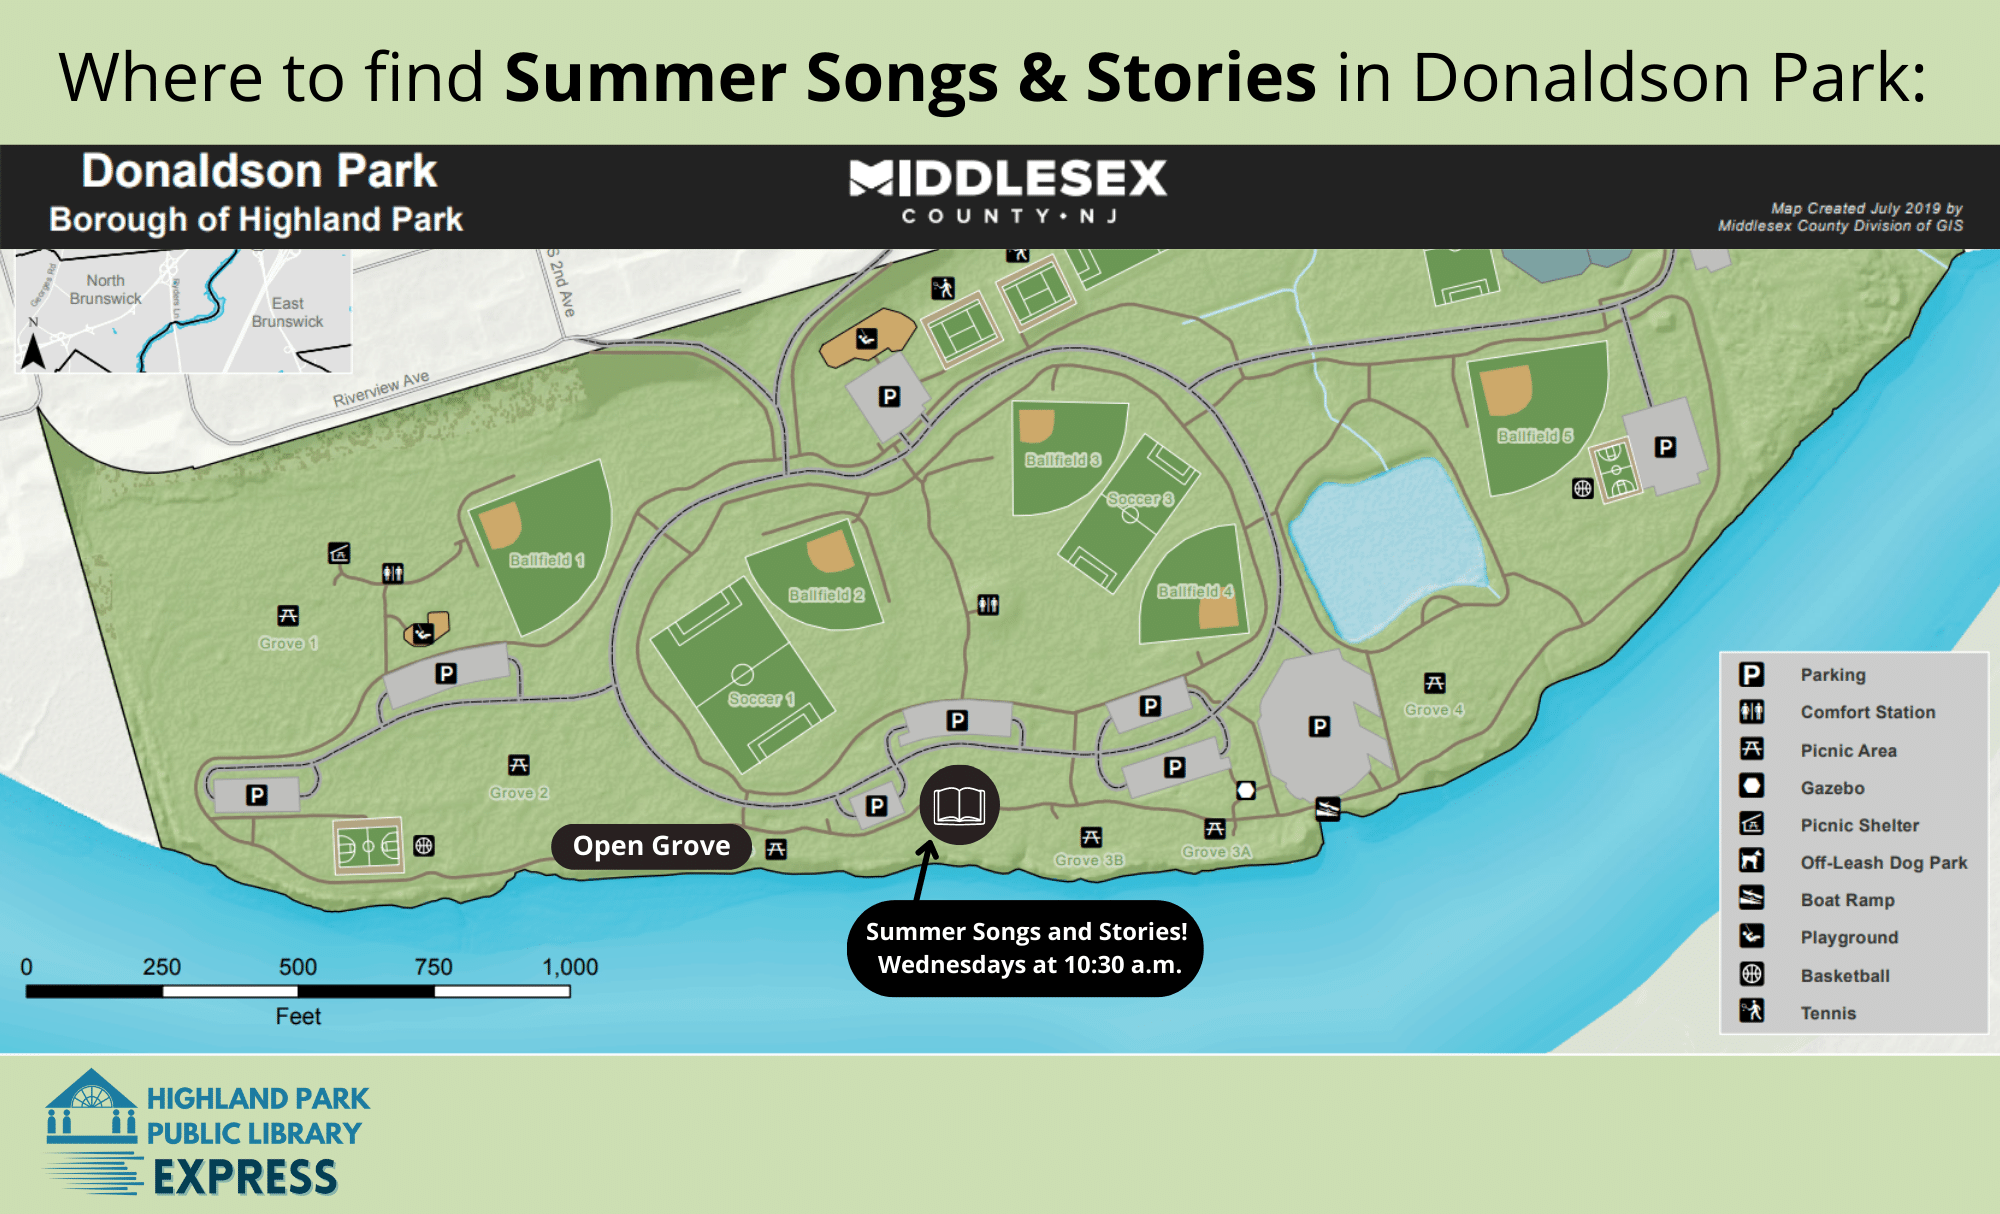 Where to find Summer Songs & Stories in Donaldson Park. IMAGE: Map of donaldson park with a book icon marking area near the open grove. Open grove is located along the river side of Donaldson Park. 